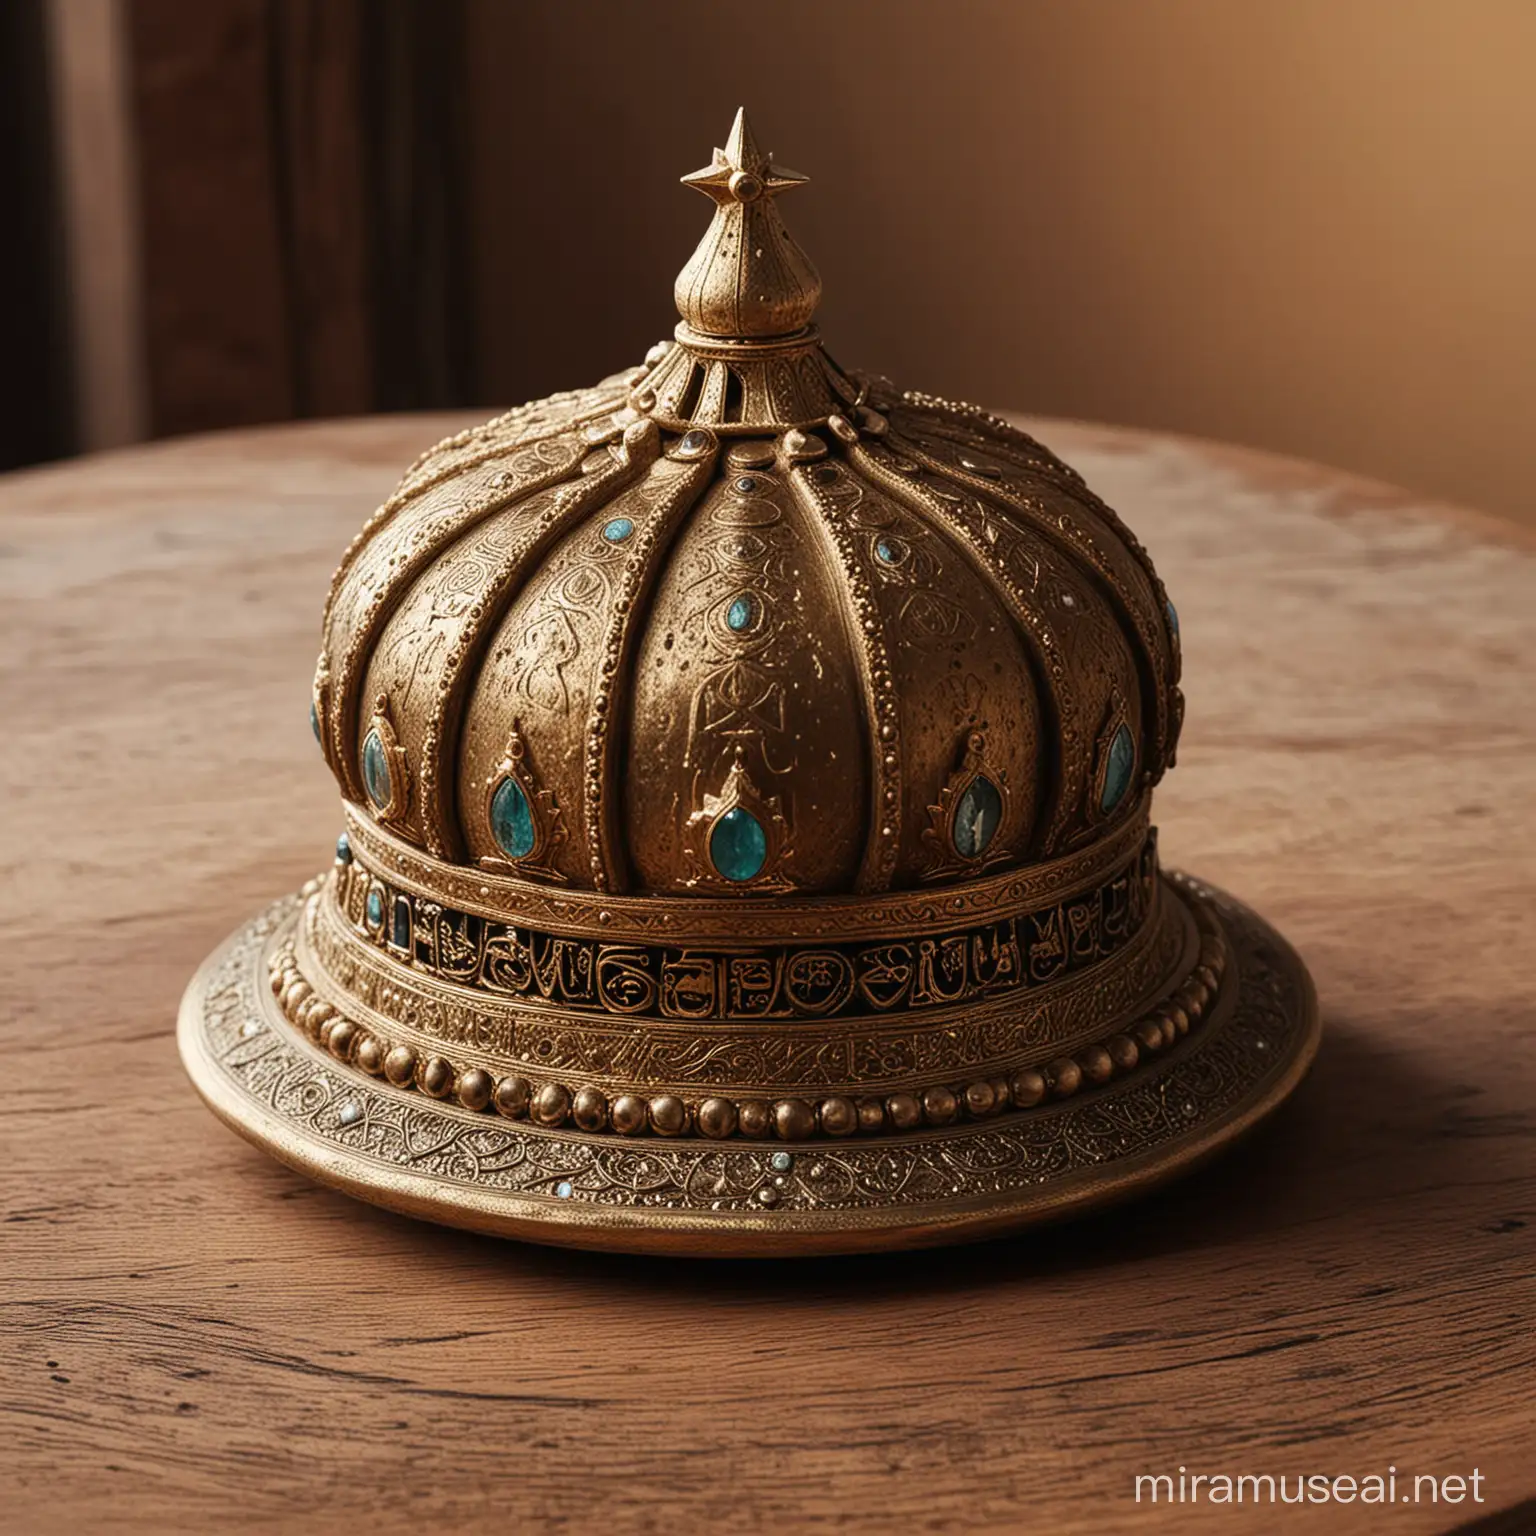 Ancient Arabian Crown on Wooden Table